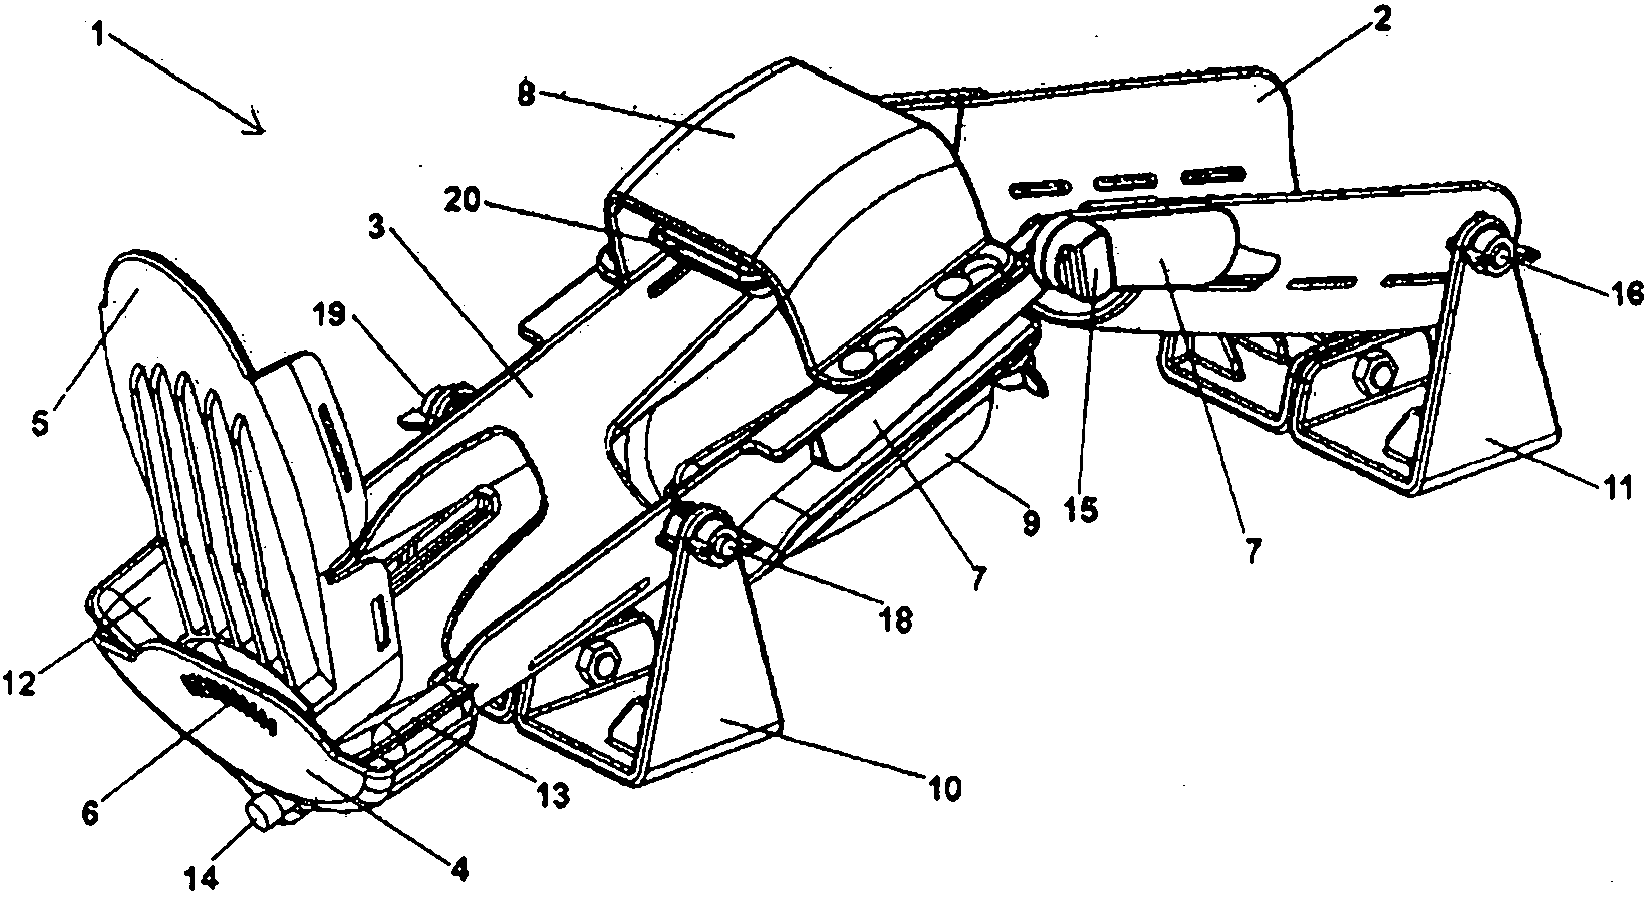 Device for measuring knee laxity